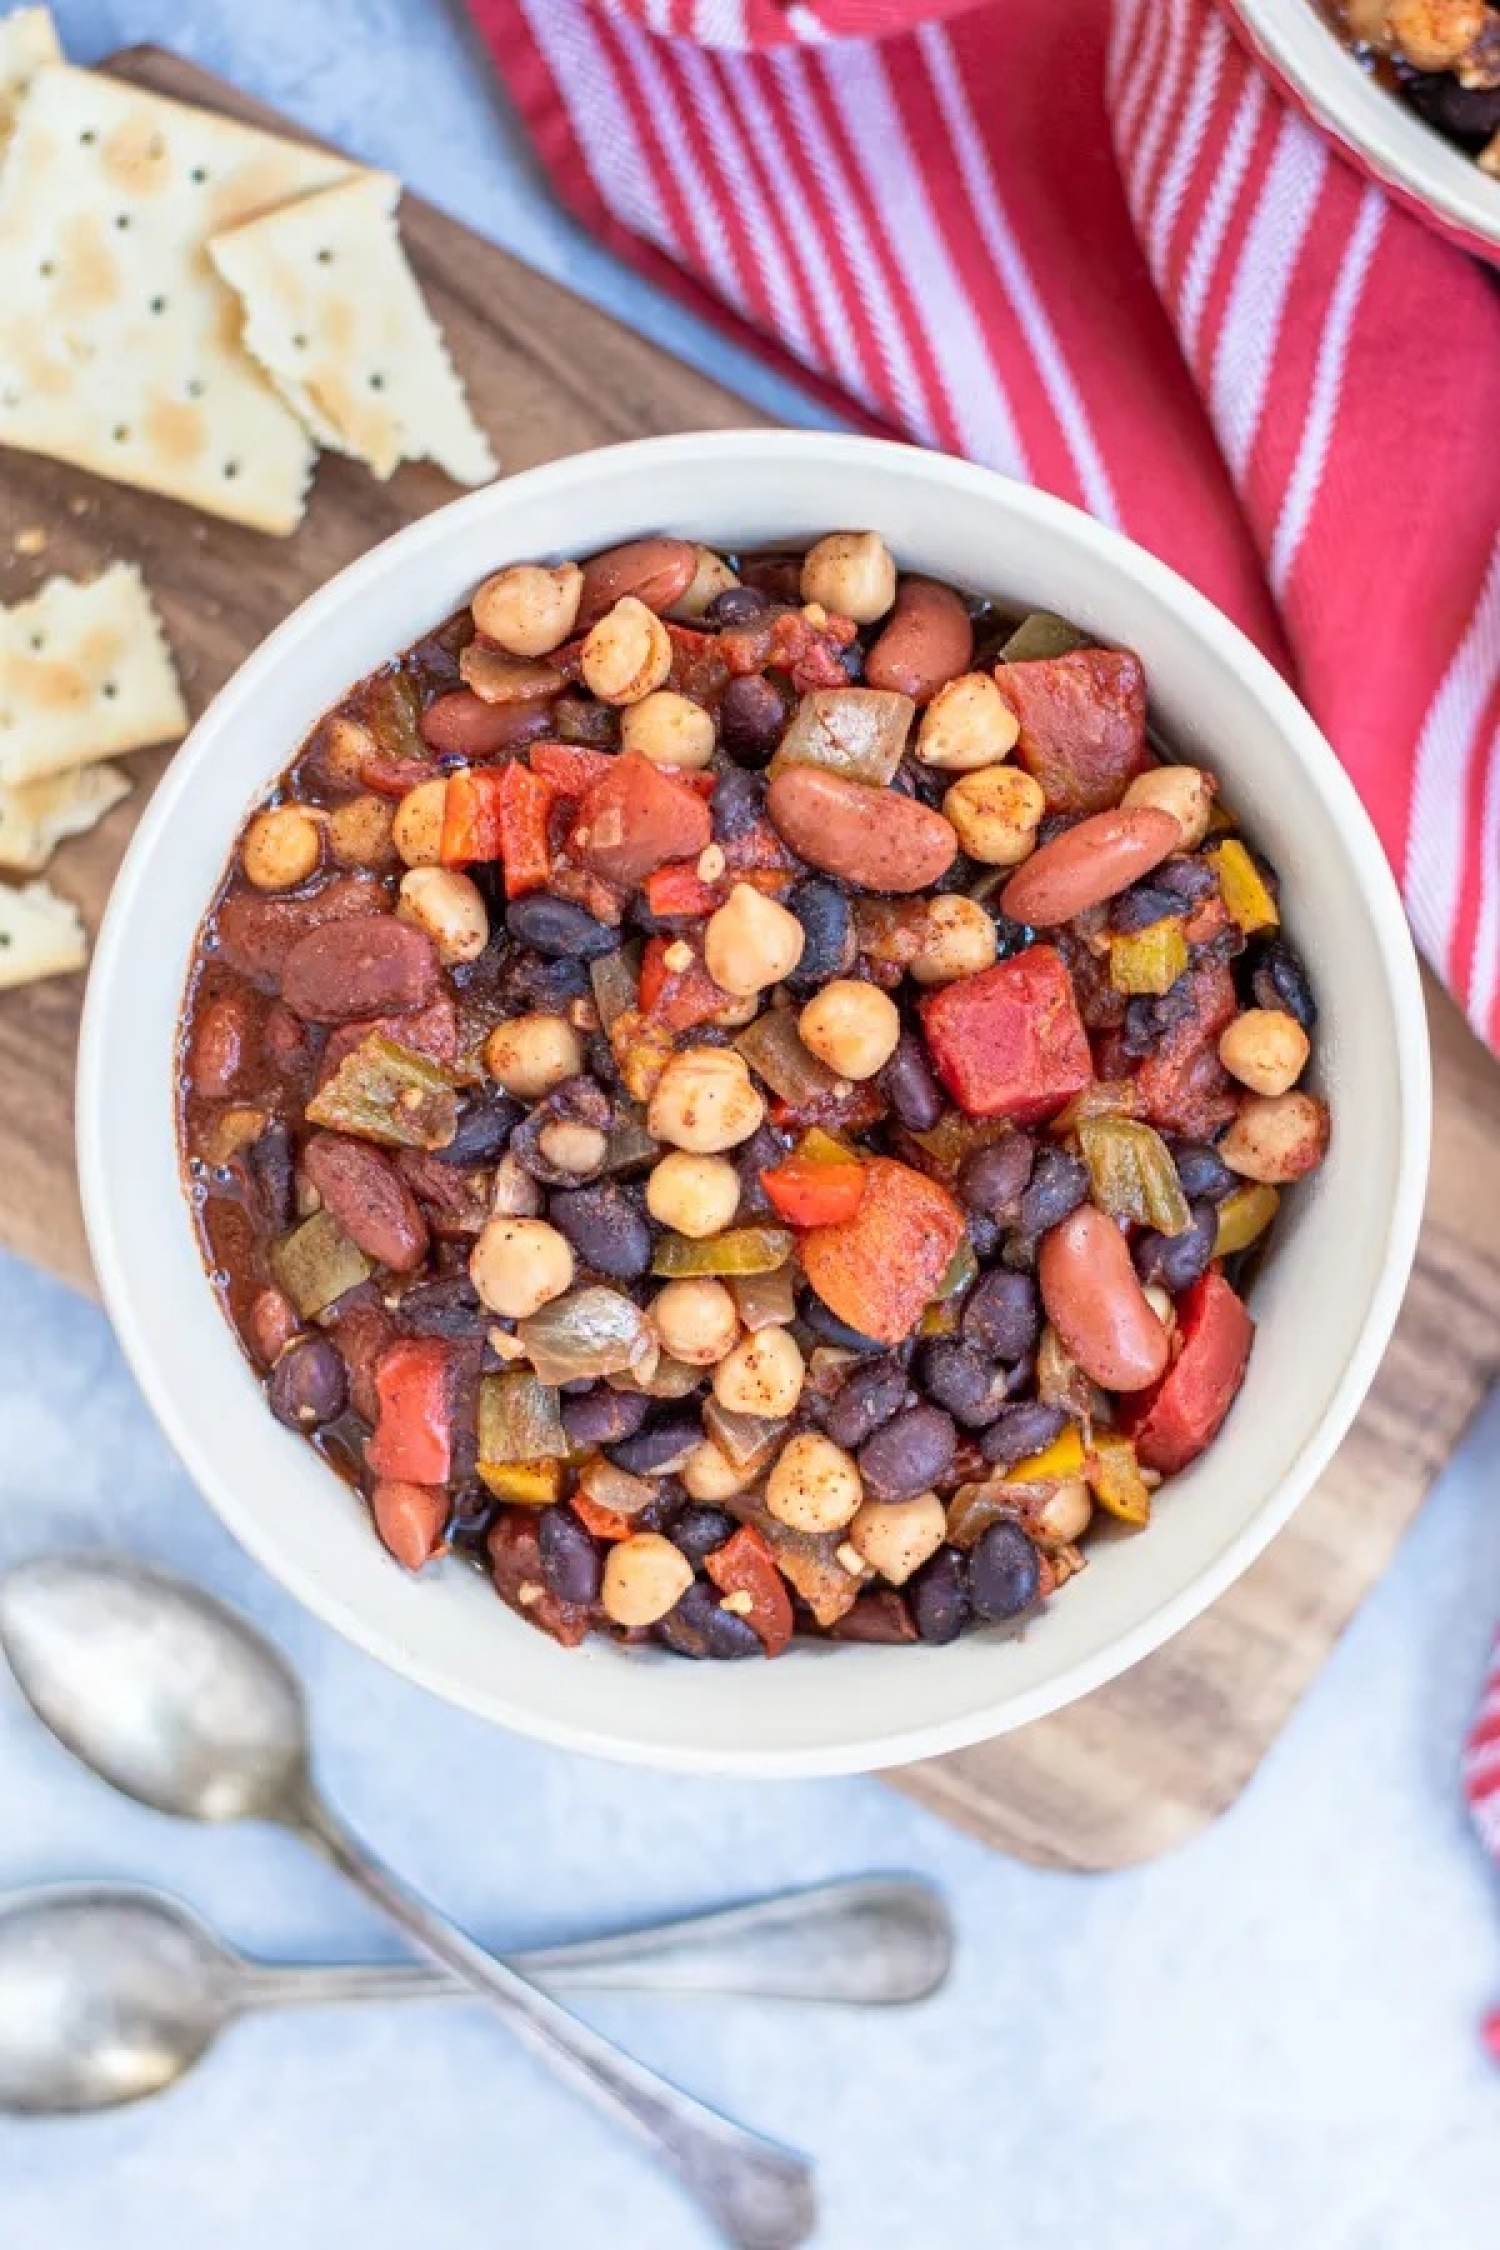 <p>What would a list of bean dishes be without chili? The best part is that you can easily omit the meat and go all in on the legumes like in <a href="https://theschmidtywife.com/slow-cooker-vegetarian-chili-recipe/" rel="noopener">this slow cooker recipe</a> that keeps things low-maintenance yet tasty with a combination of chickpeas, kidney beans and black beans.</p>